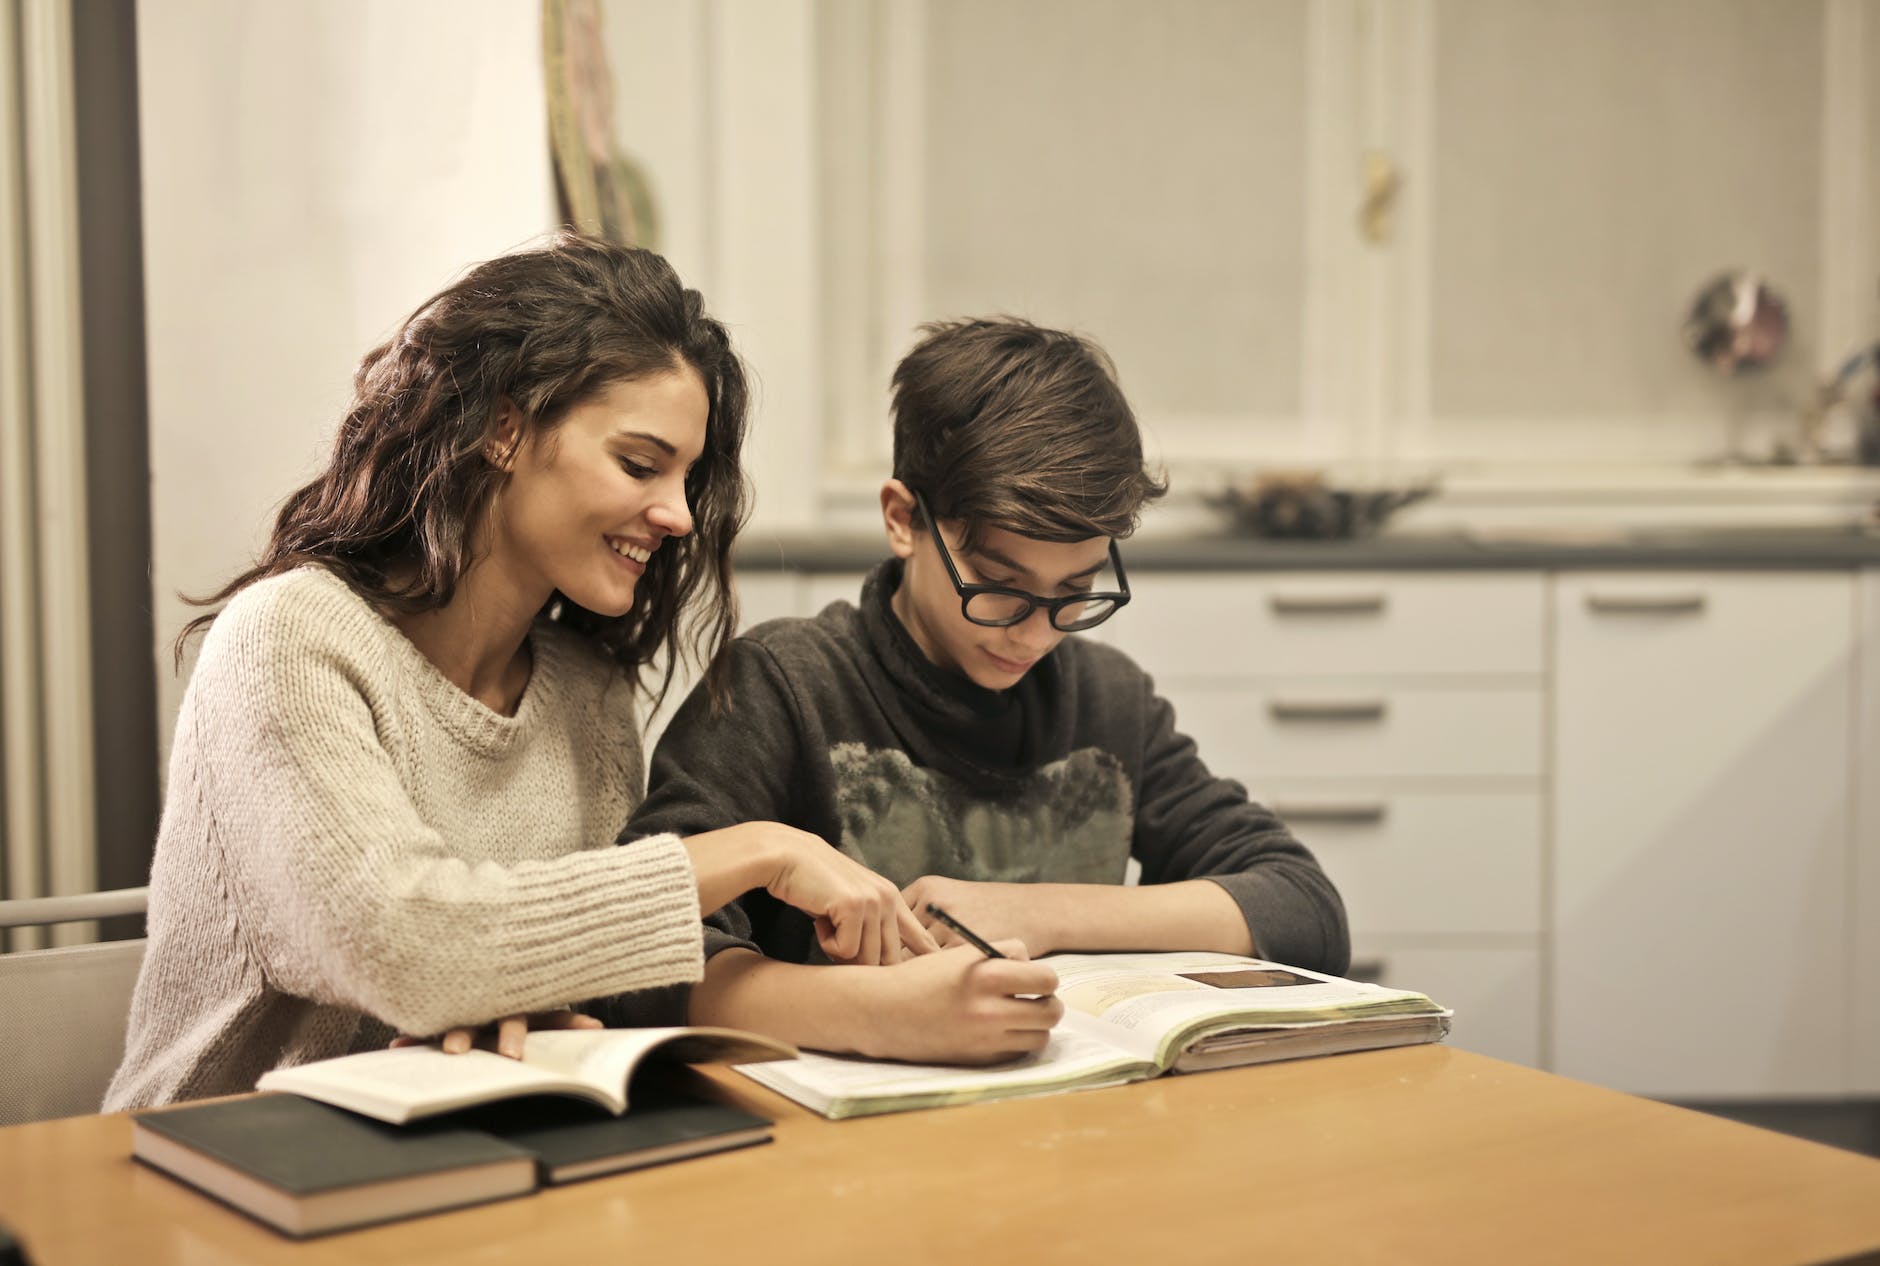 What do I do if I am nervous about homeschooling my children?